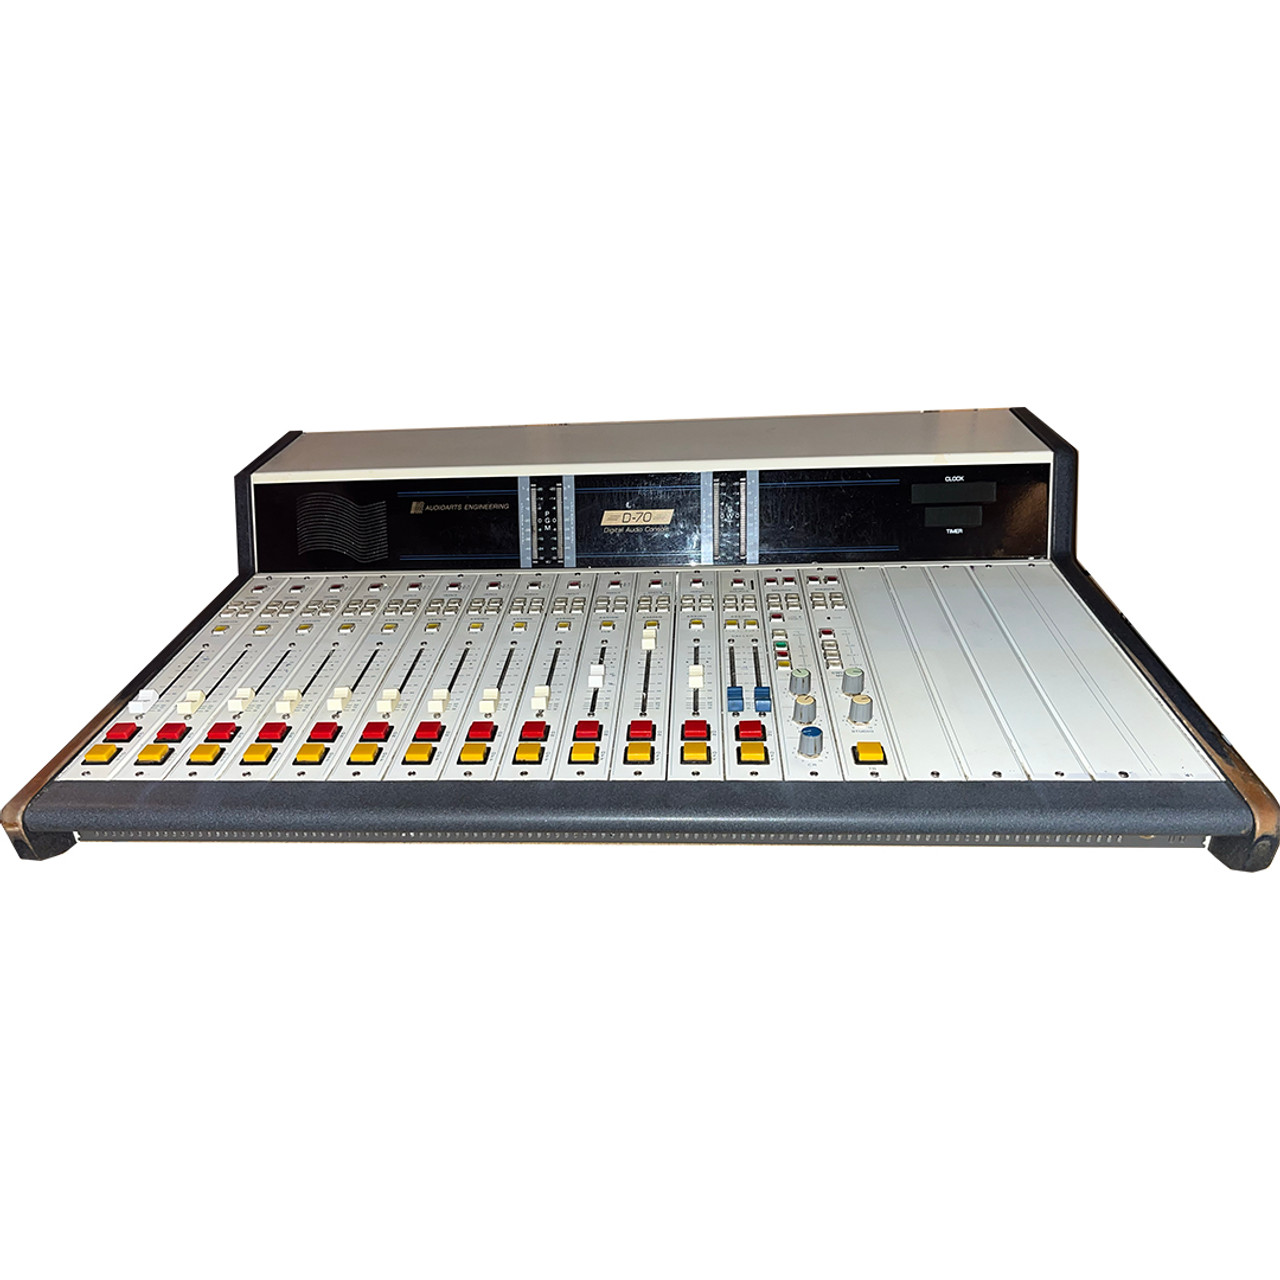 Wheatstone Audio Arts D70 12 Channel On-Air Console